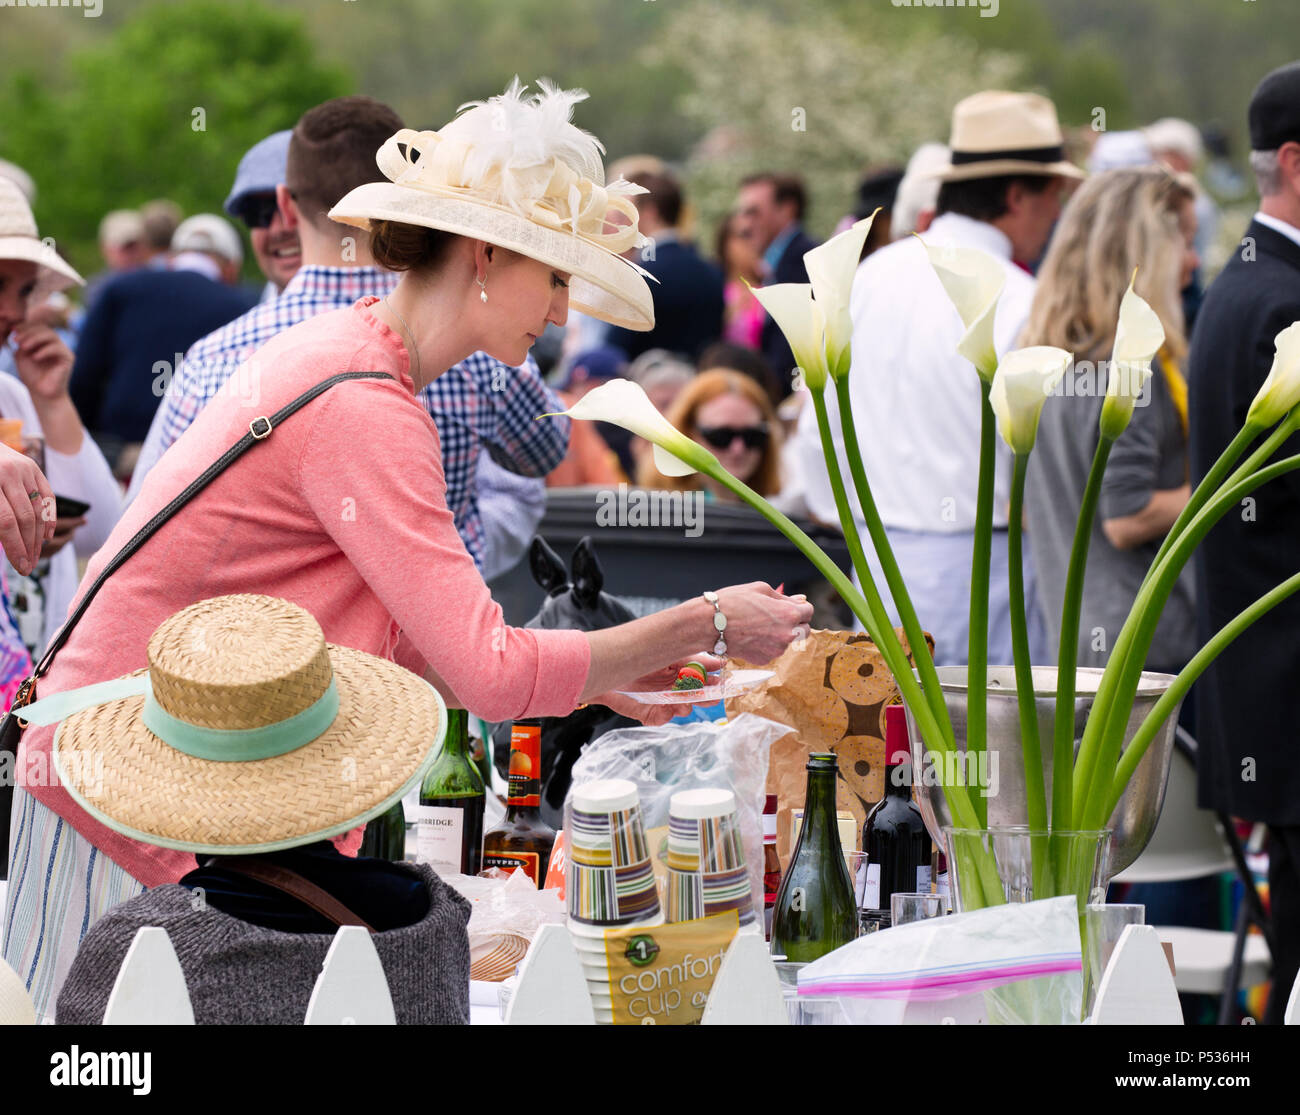 The Plains, Virginia/USA-5-19-17: Woman wears fashionable hat at a tailgate party at The Virginia Gold Cup. Stock Photo